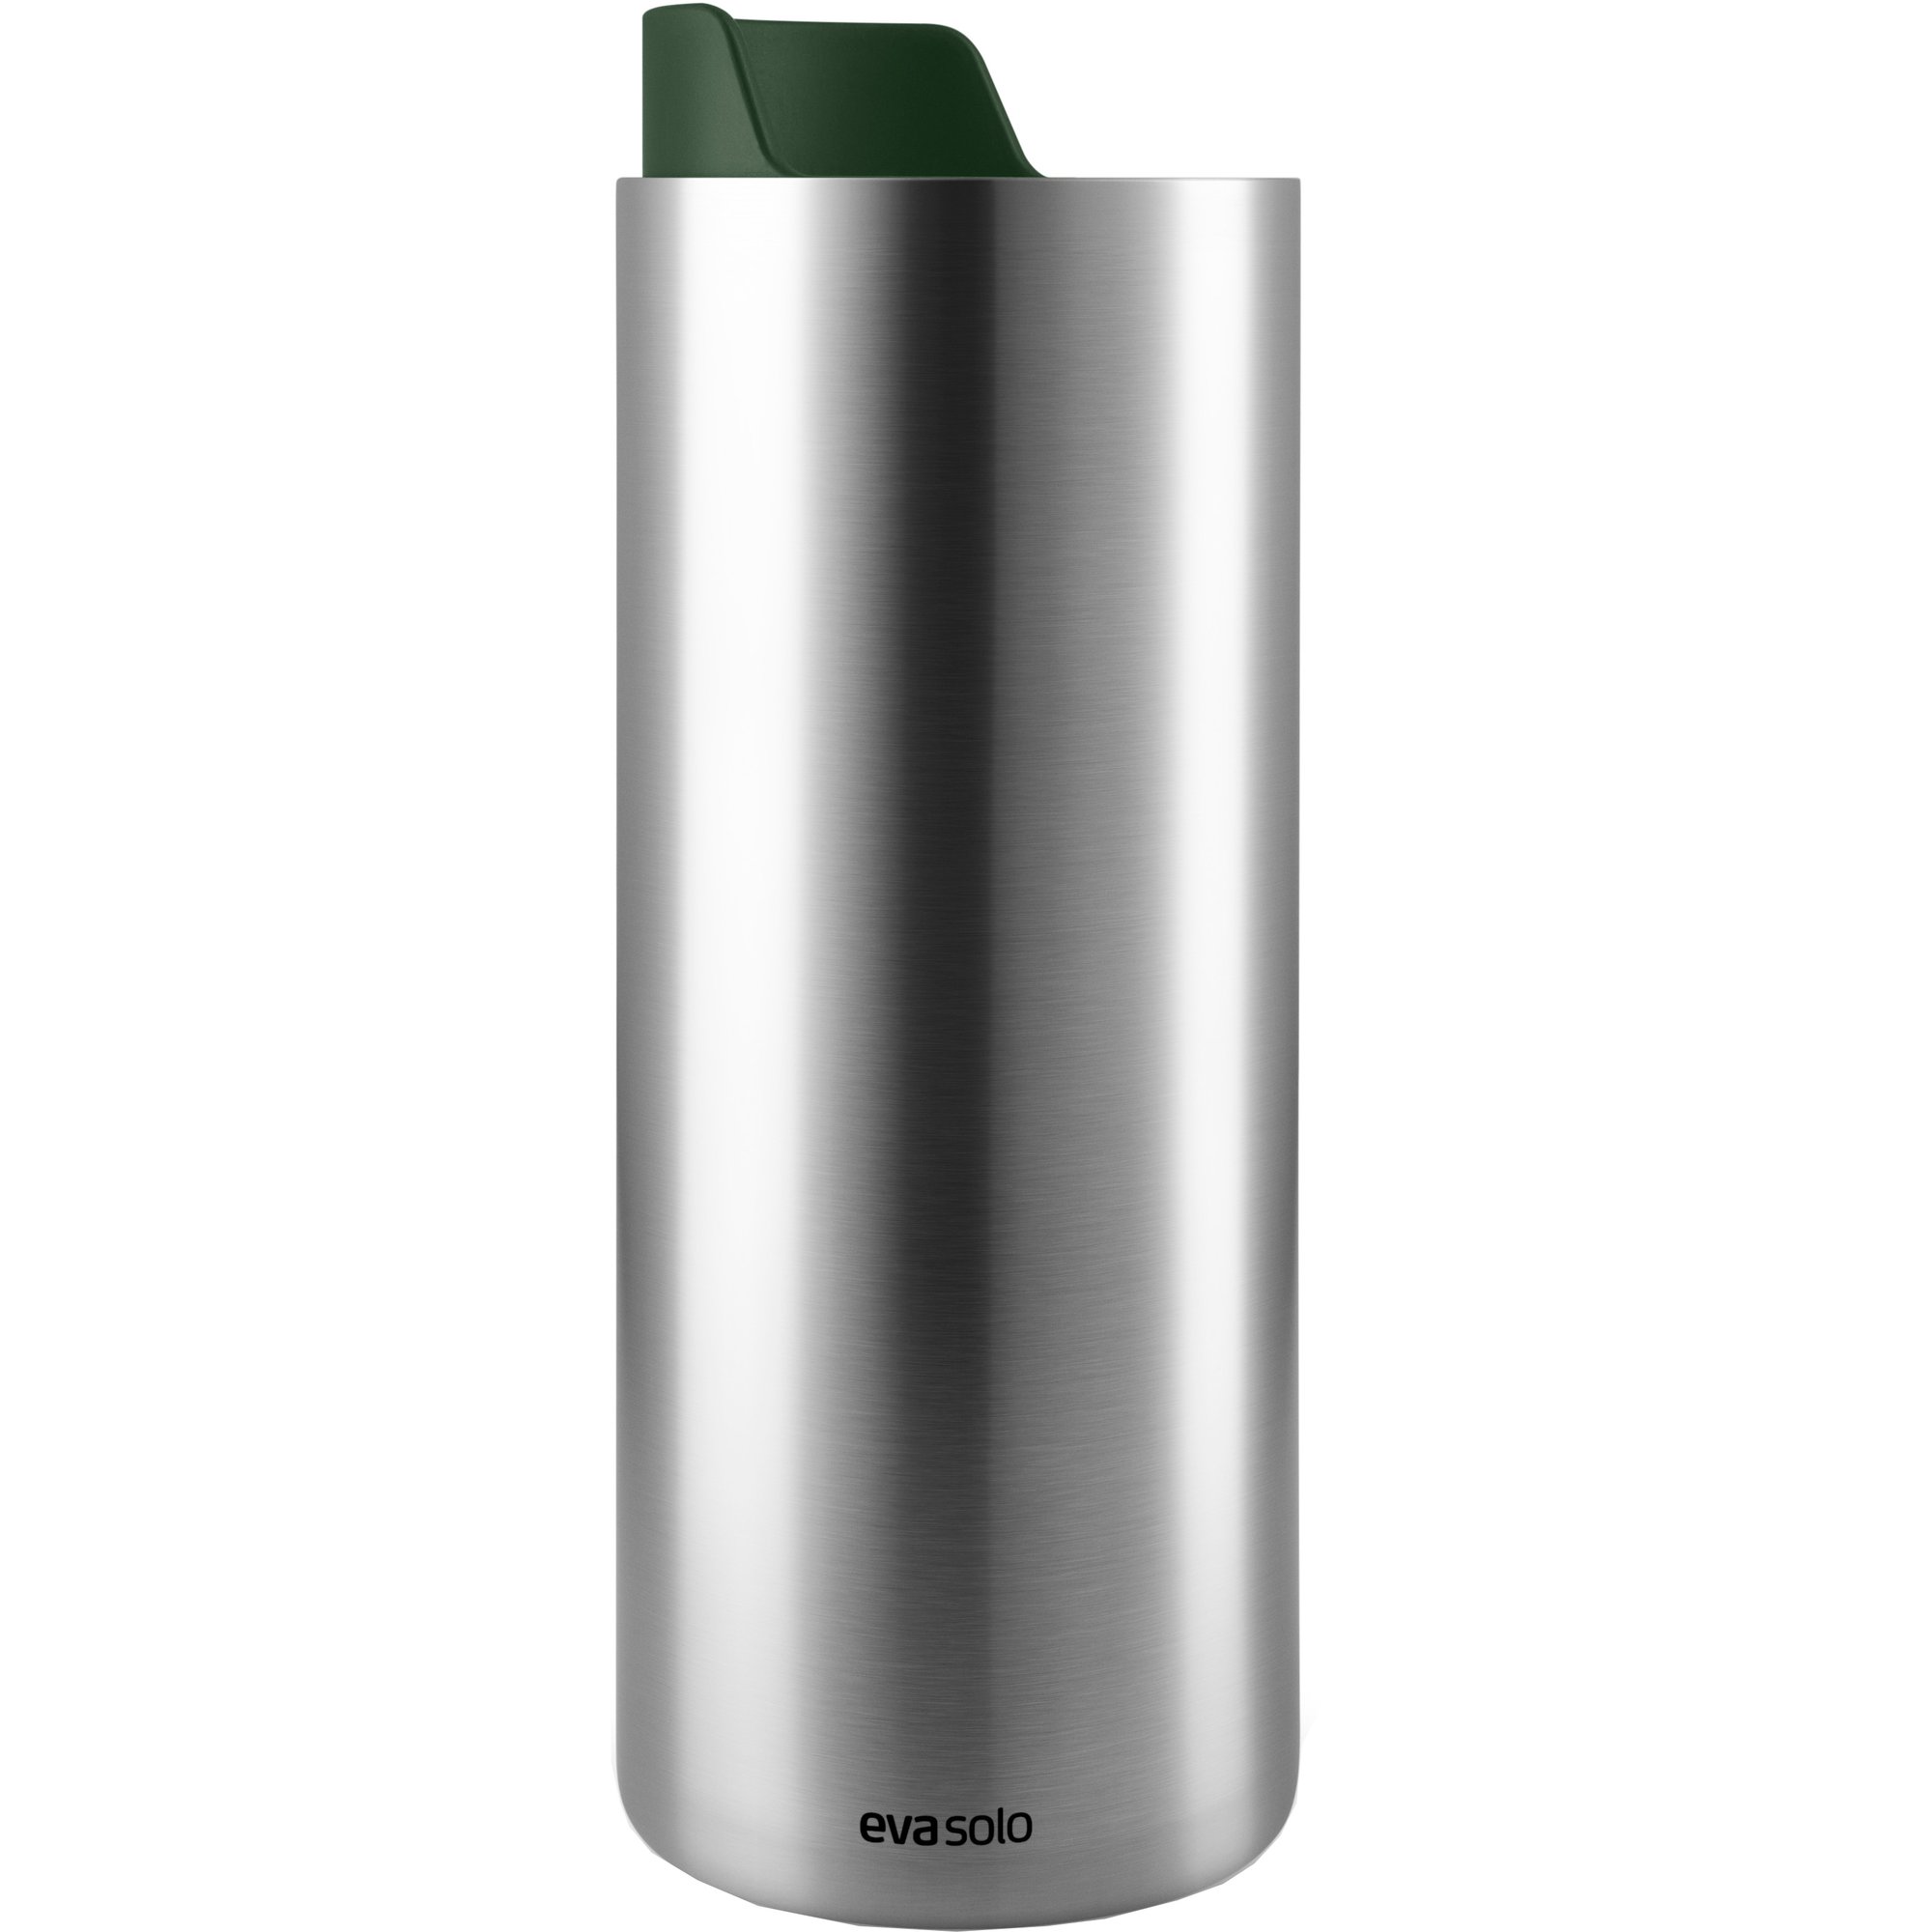 7: Eva Solo Urban To Go Cup Recycled termokrus 0,35 liter, emerald green